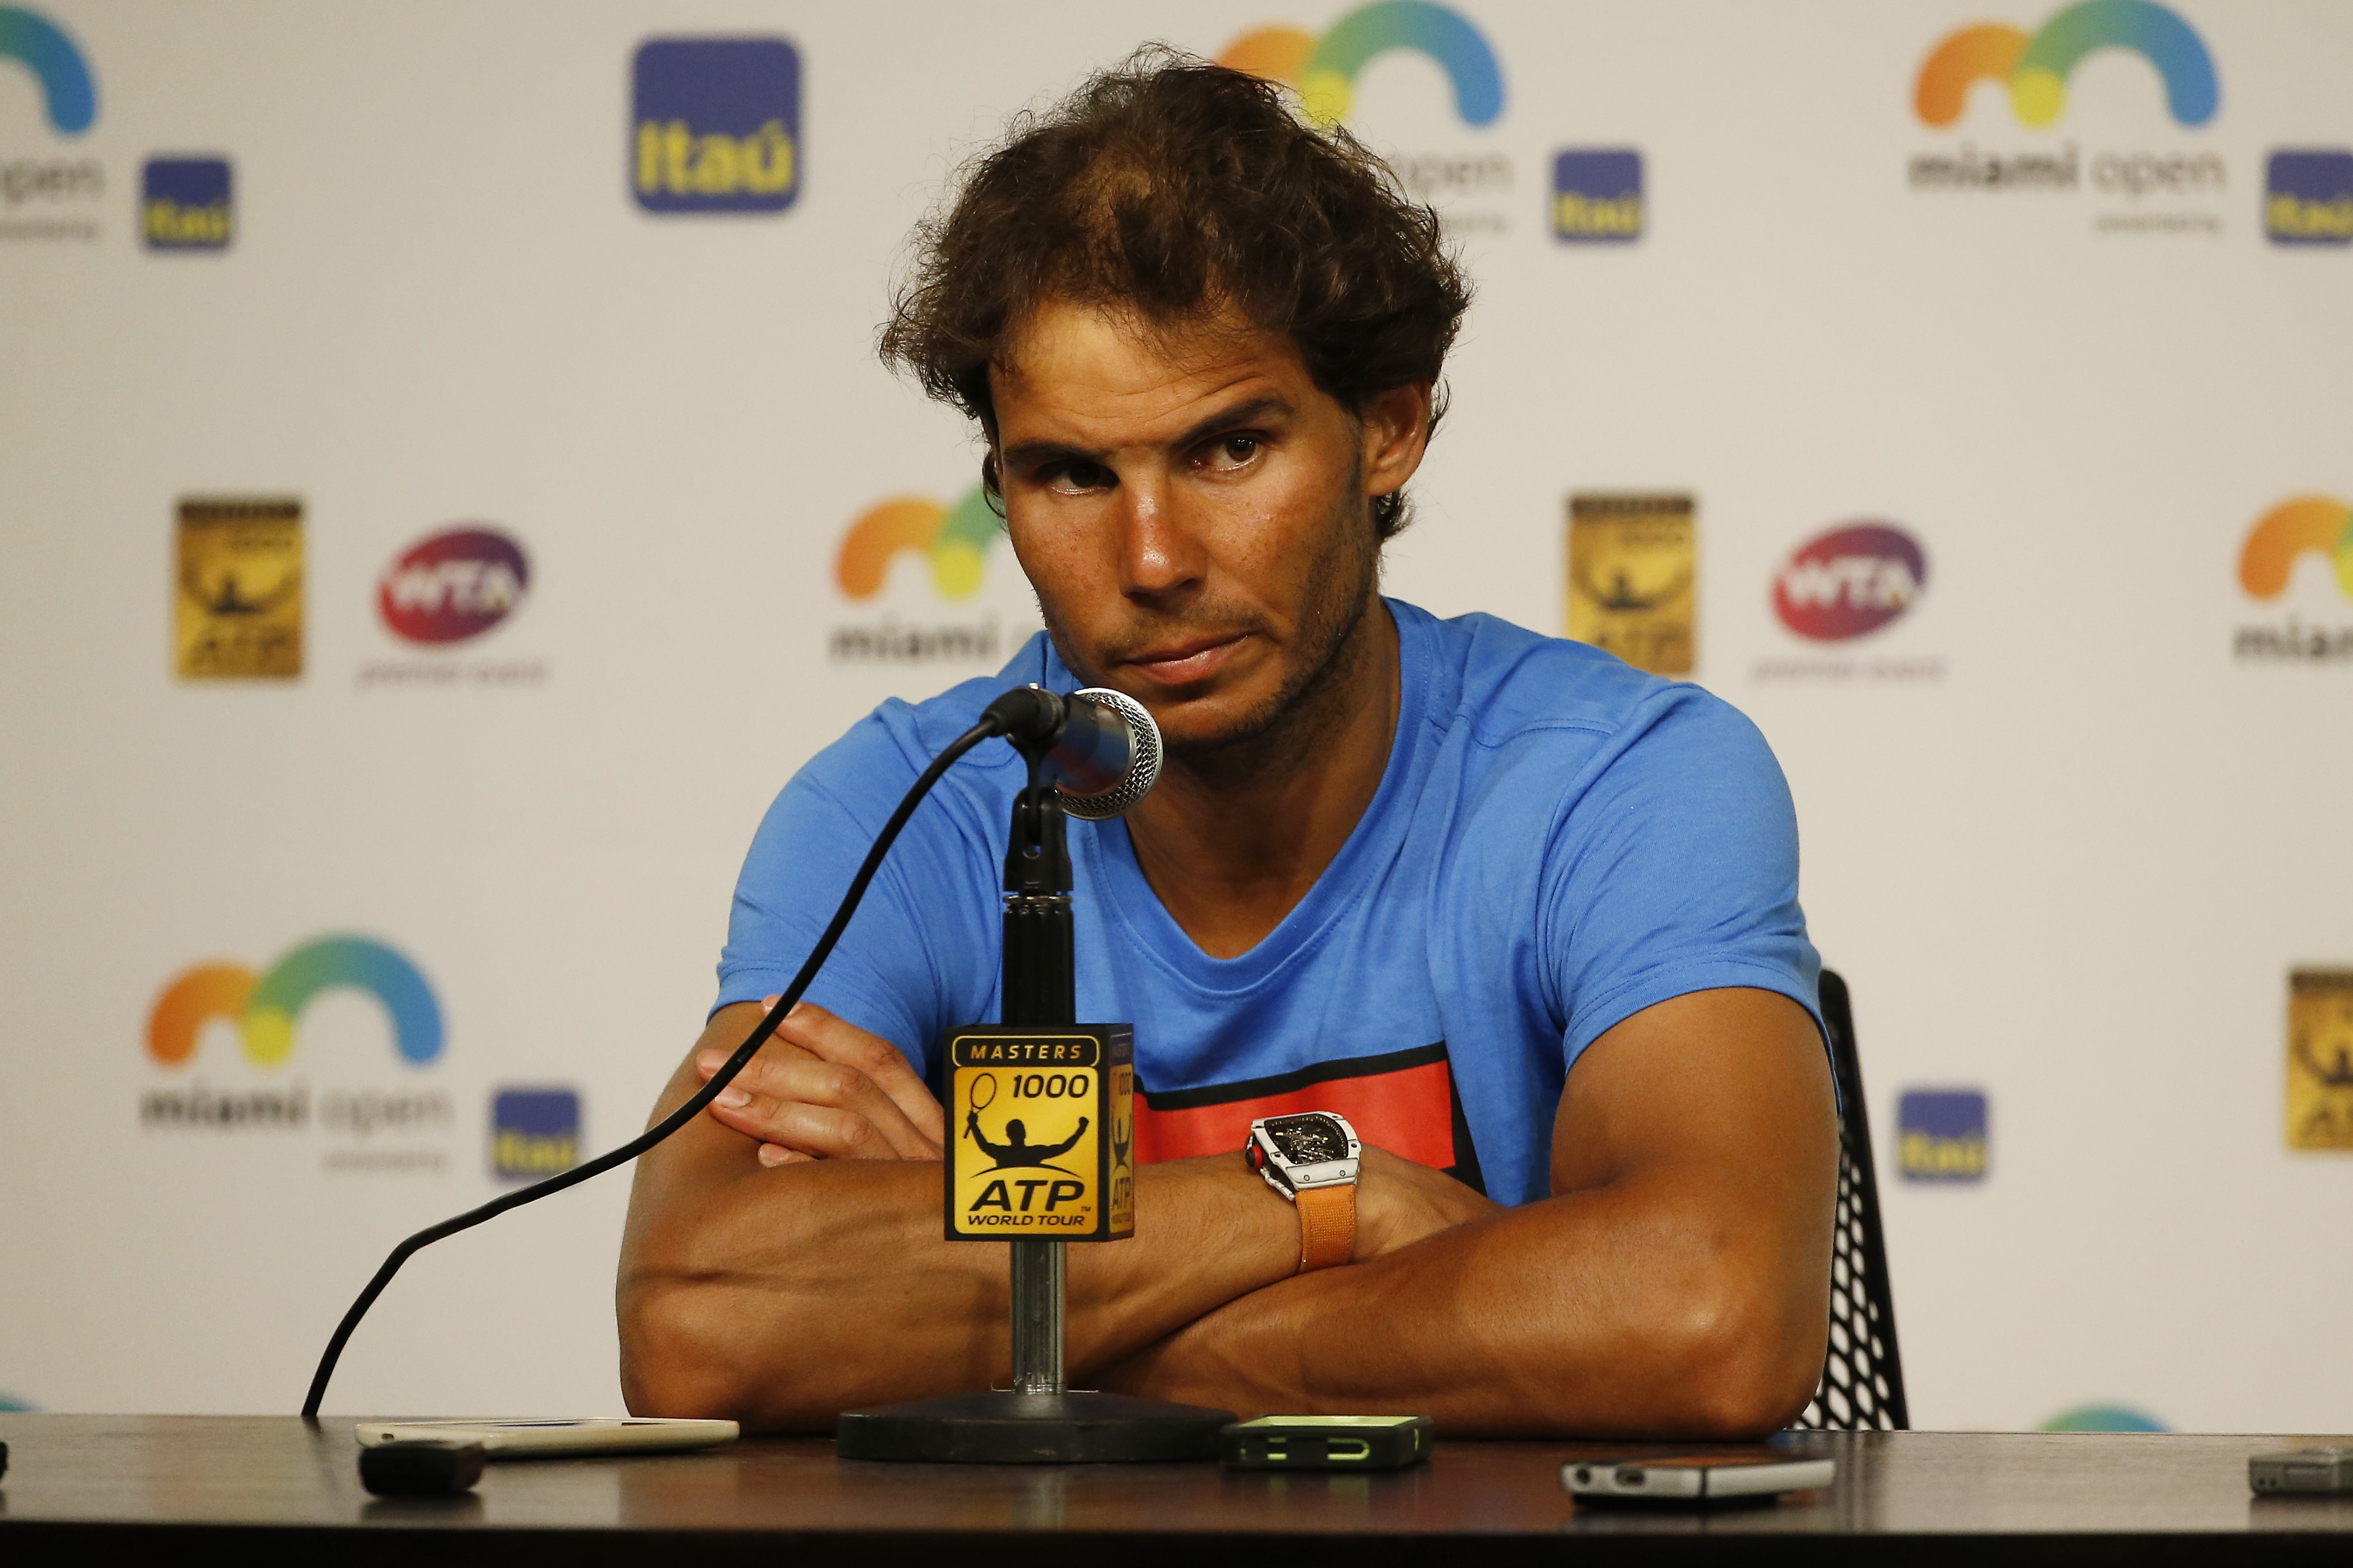 Dizzy Nadal retires in Florida heat, Murray moves on